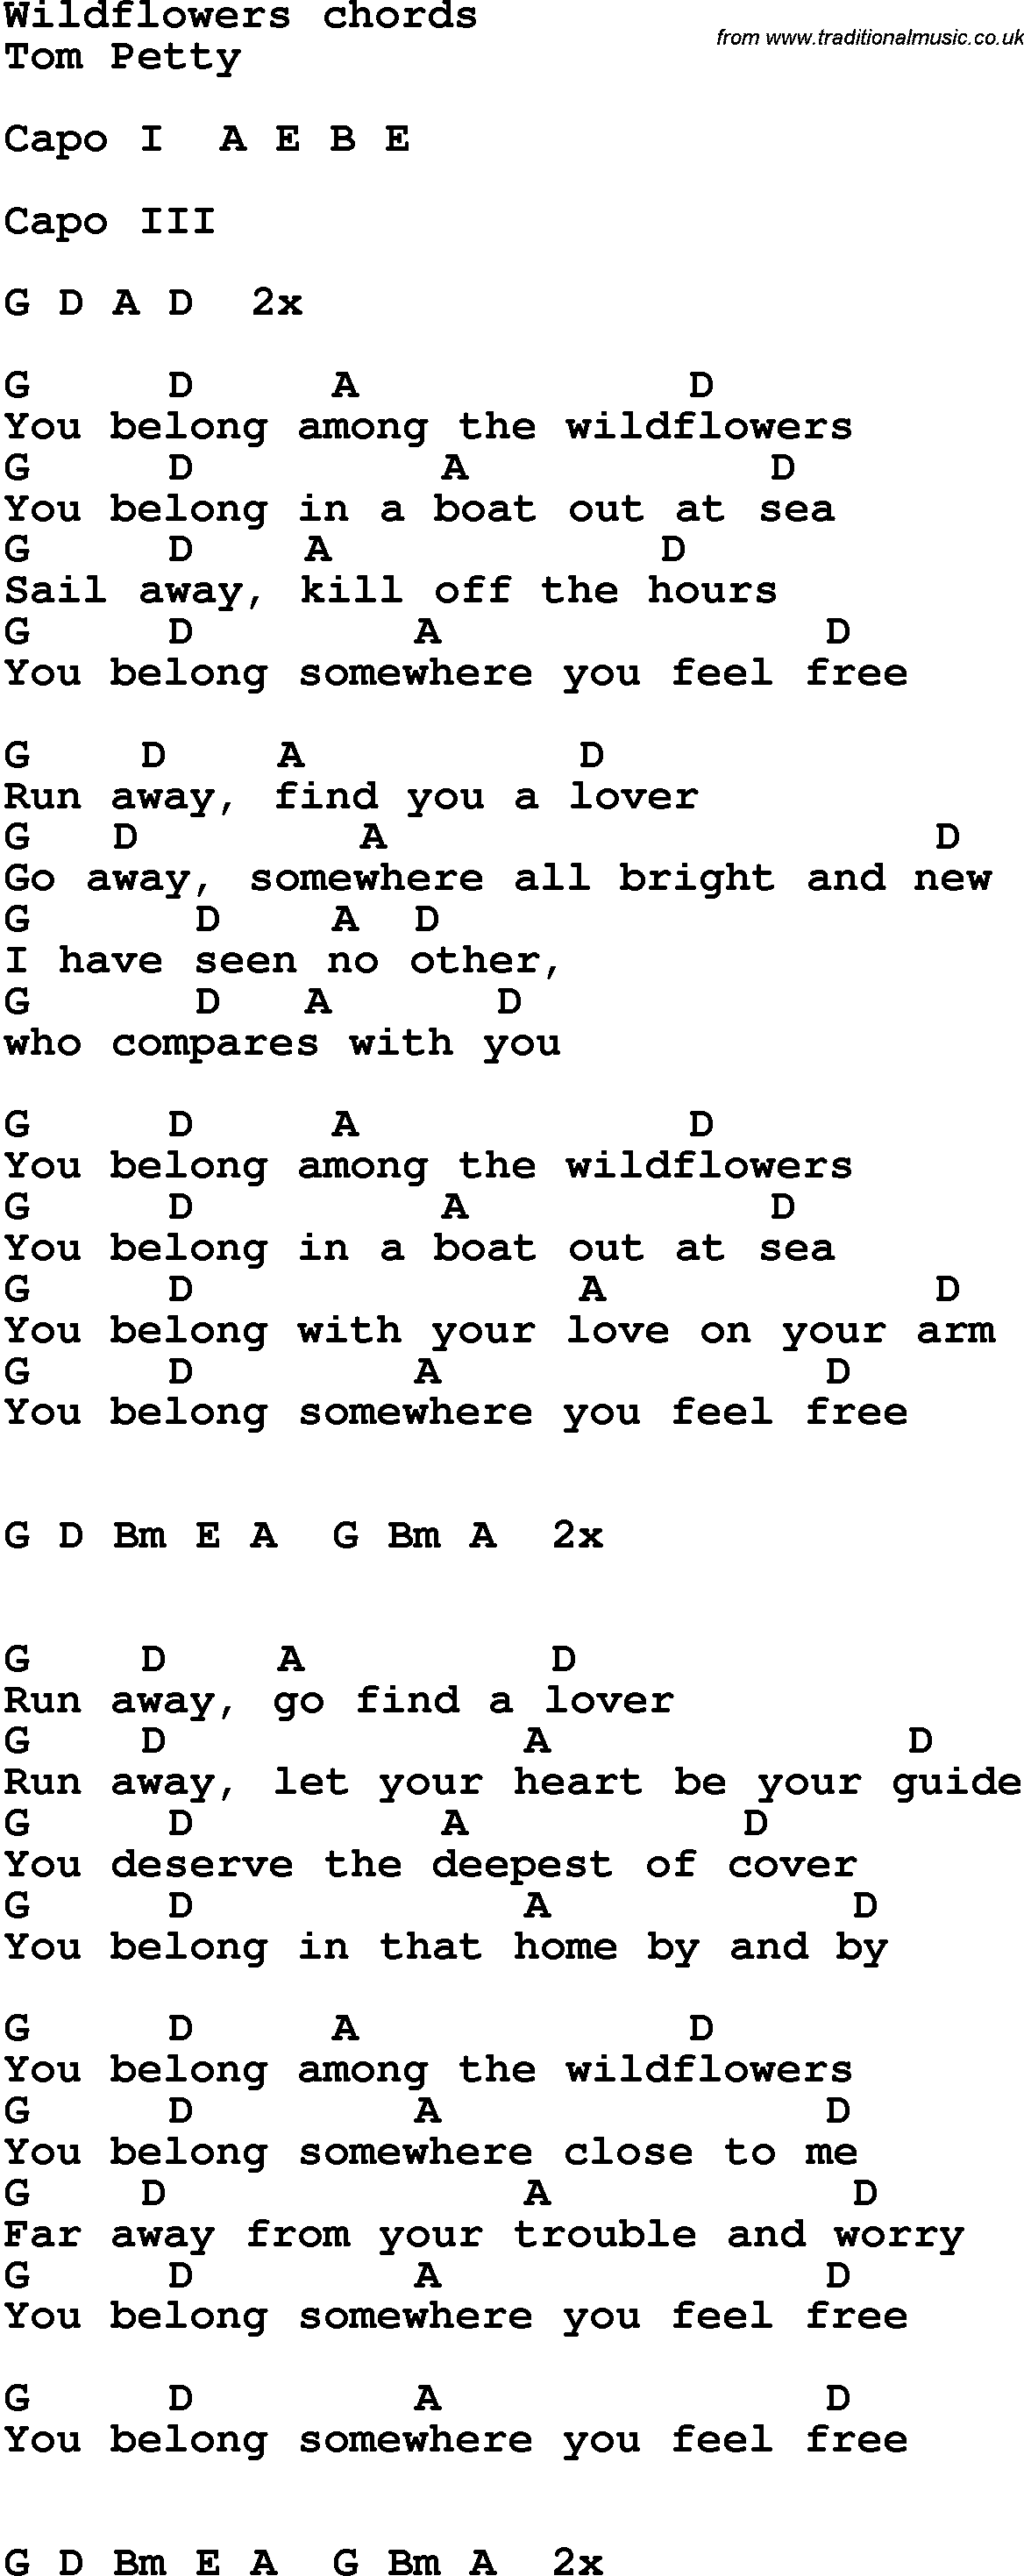 Song Lyrics with guitar chords for Wildflowers